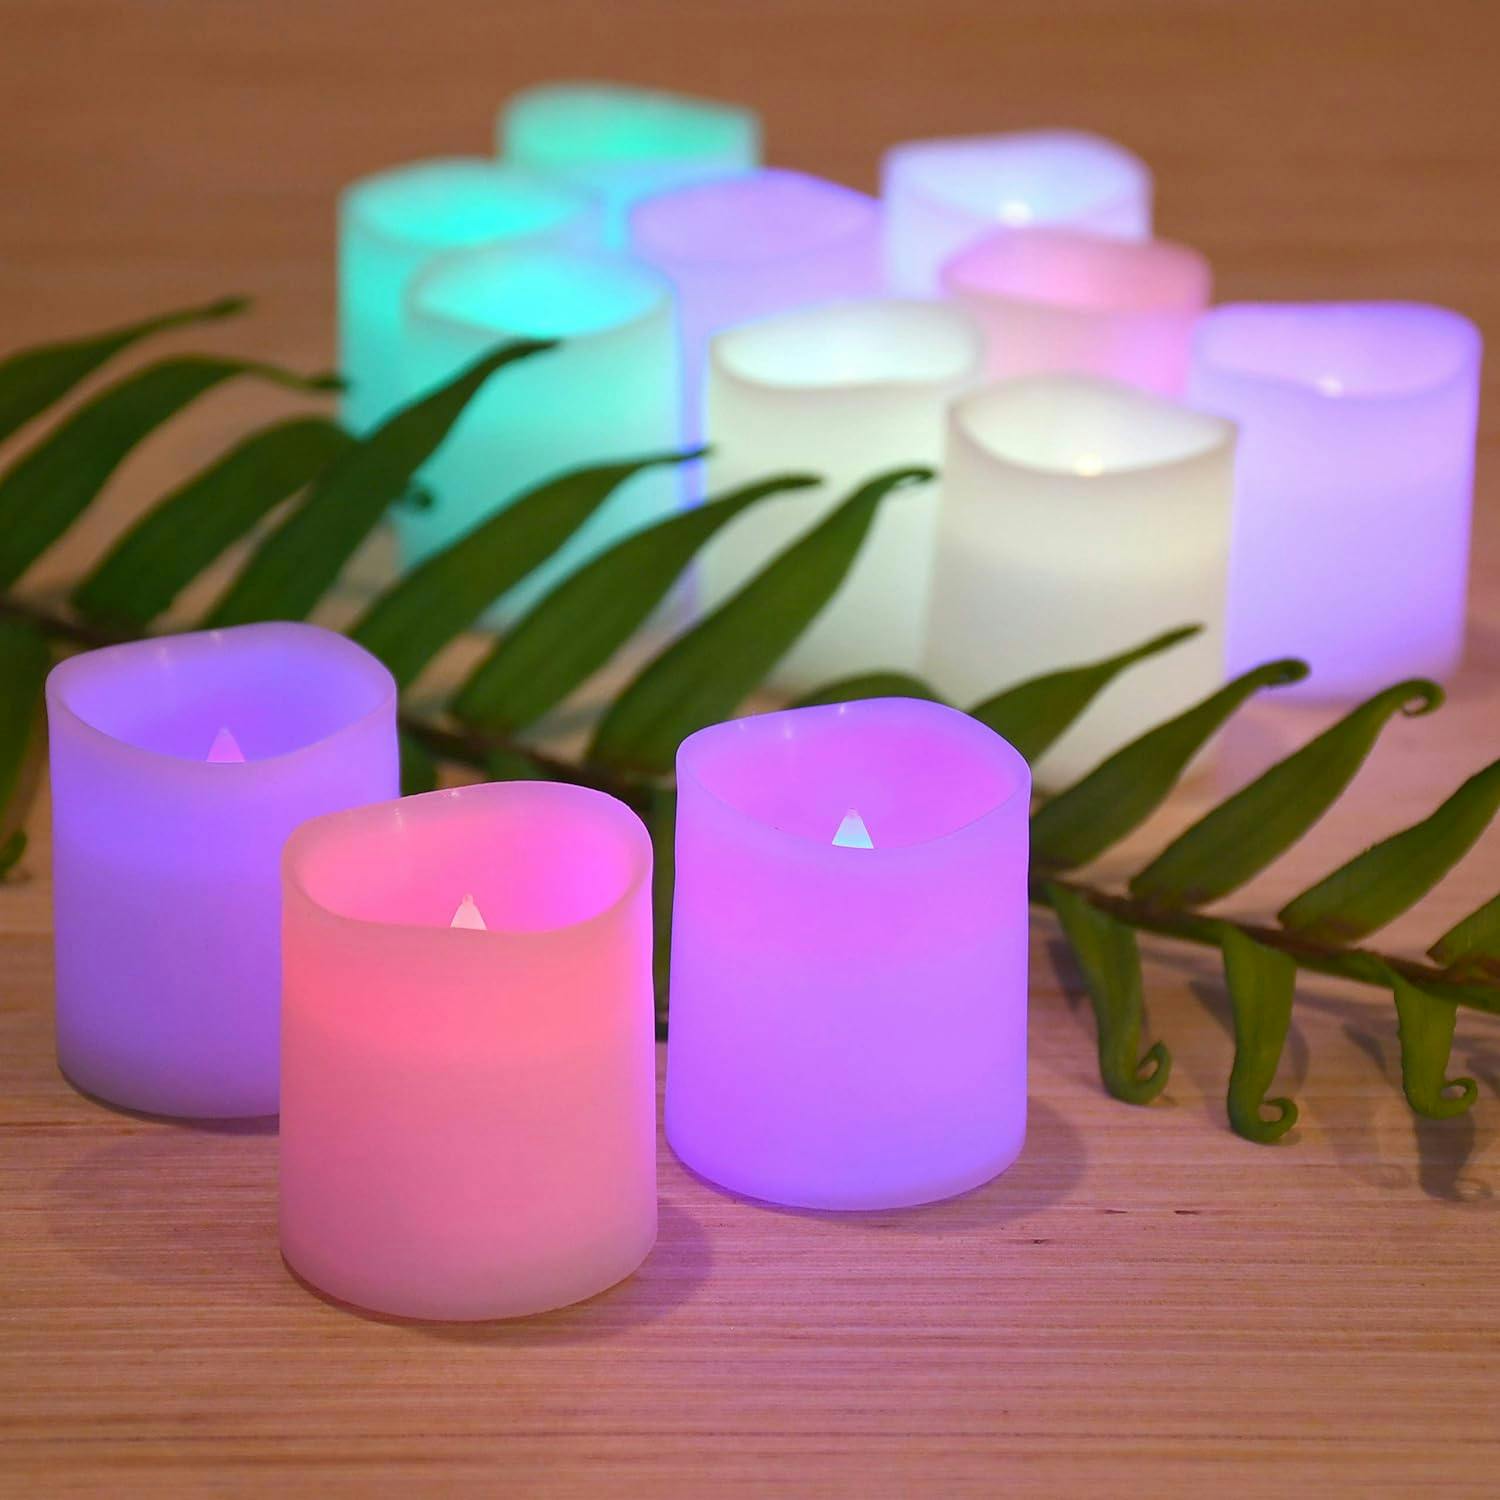 Eternal Glow Set of 12 Flameless LED Votive Candles in White